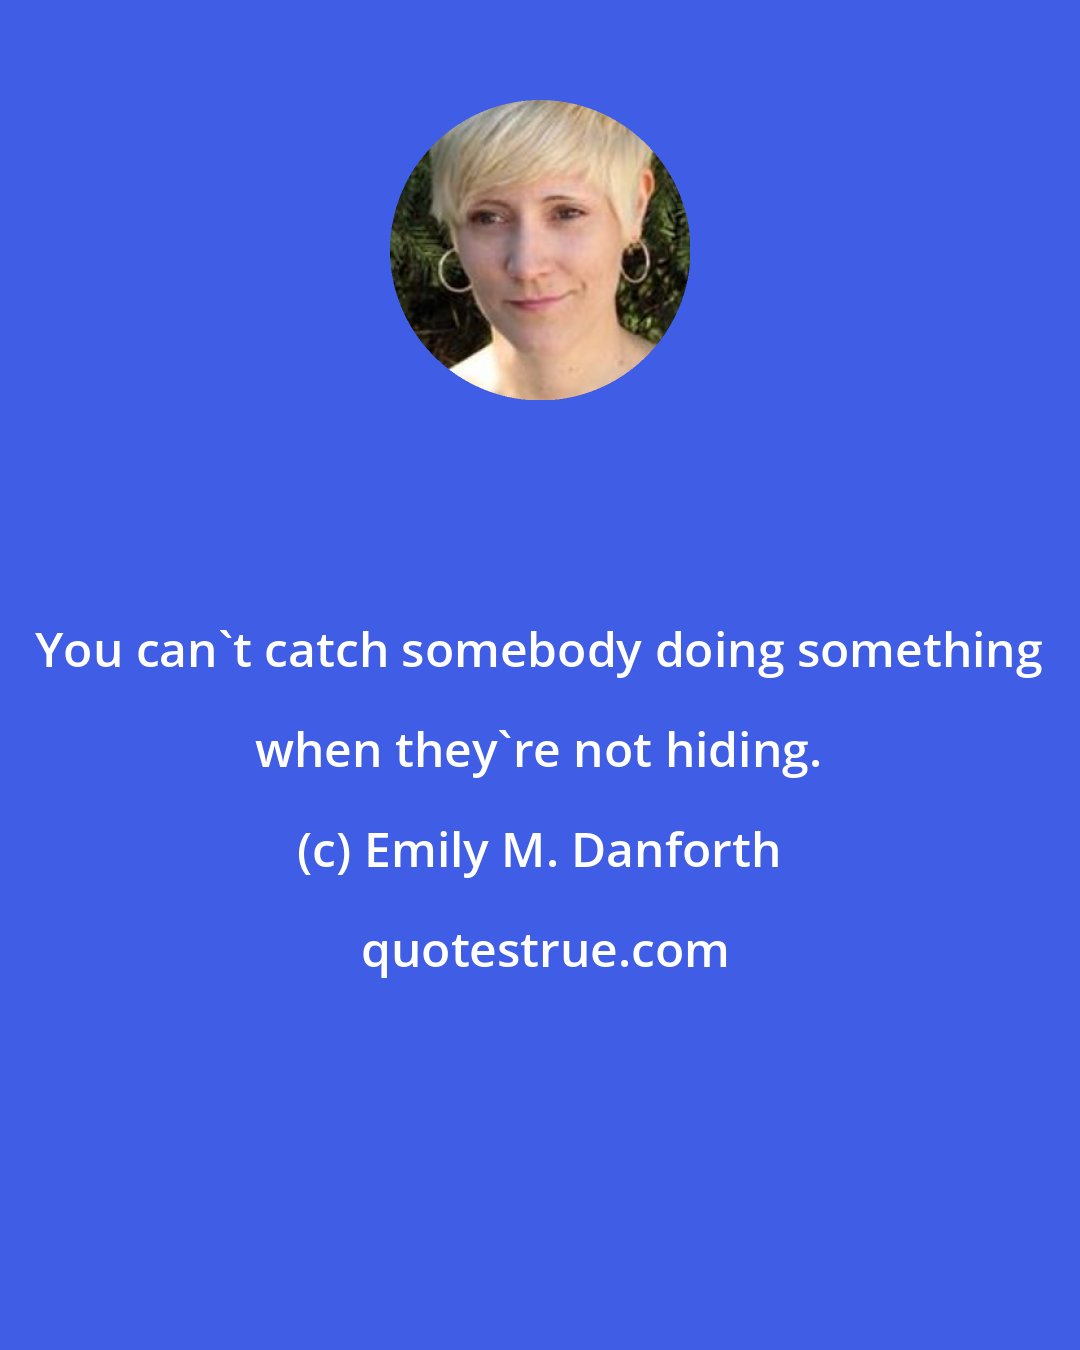 Emily M. Danforth: You can't catch somebody doing something when they're not hiding.